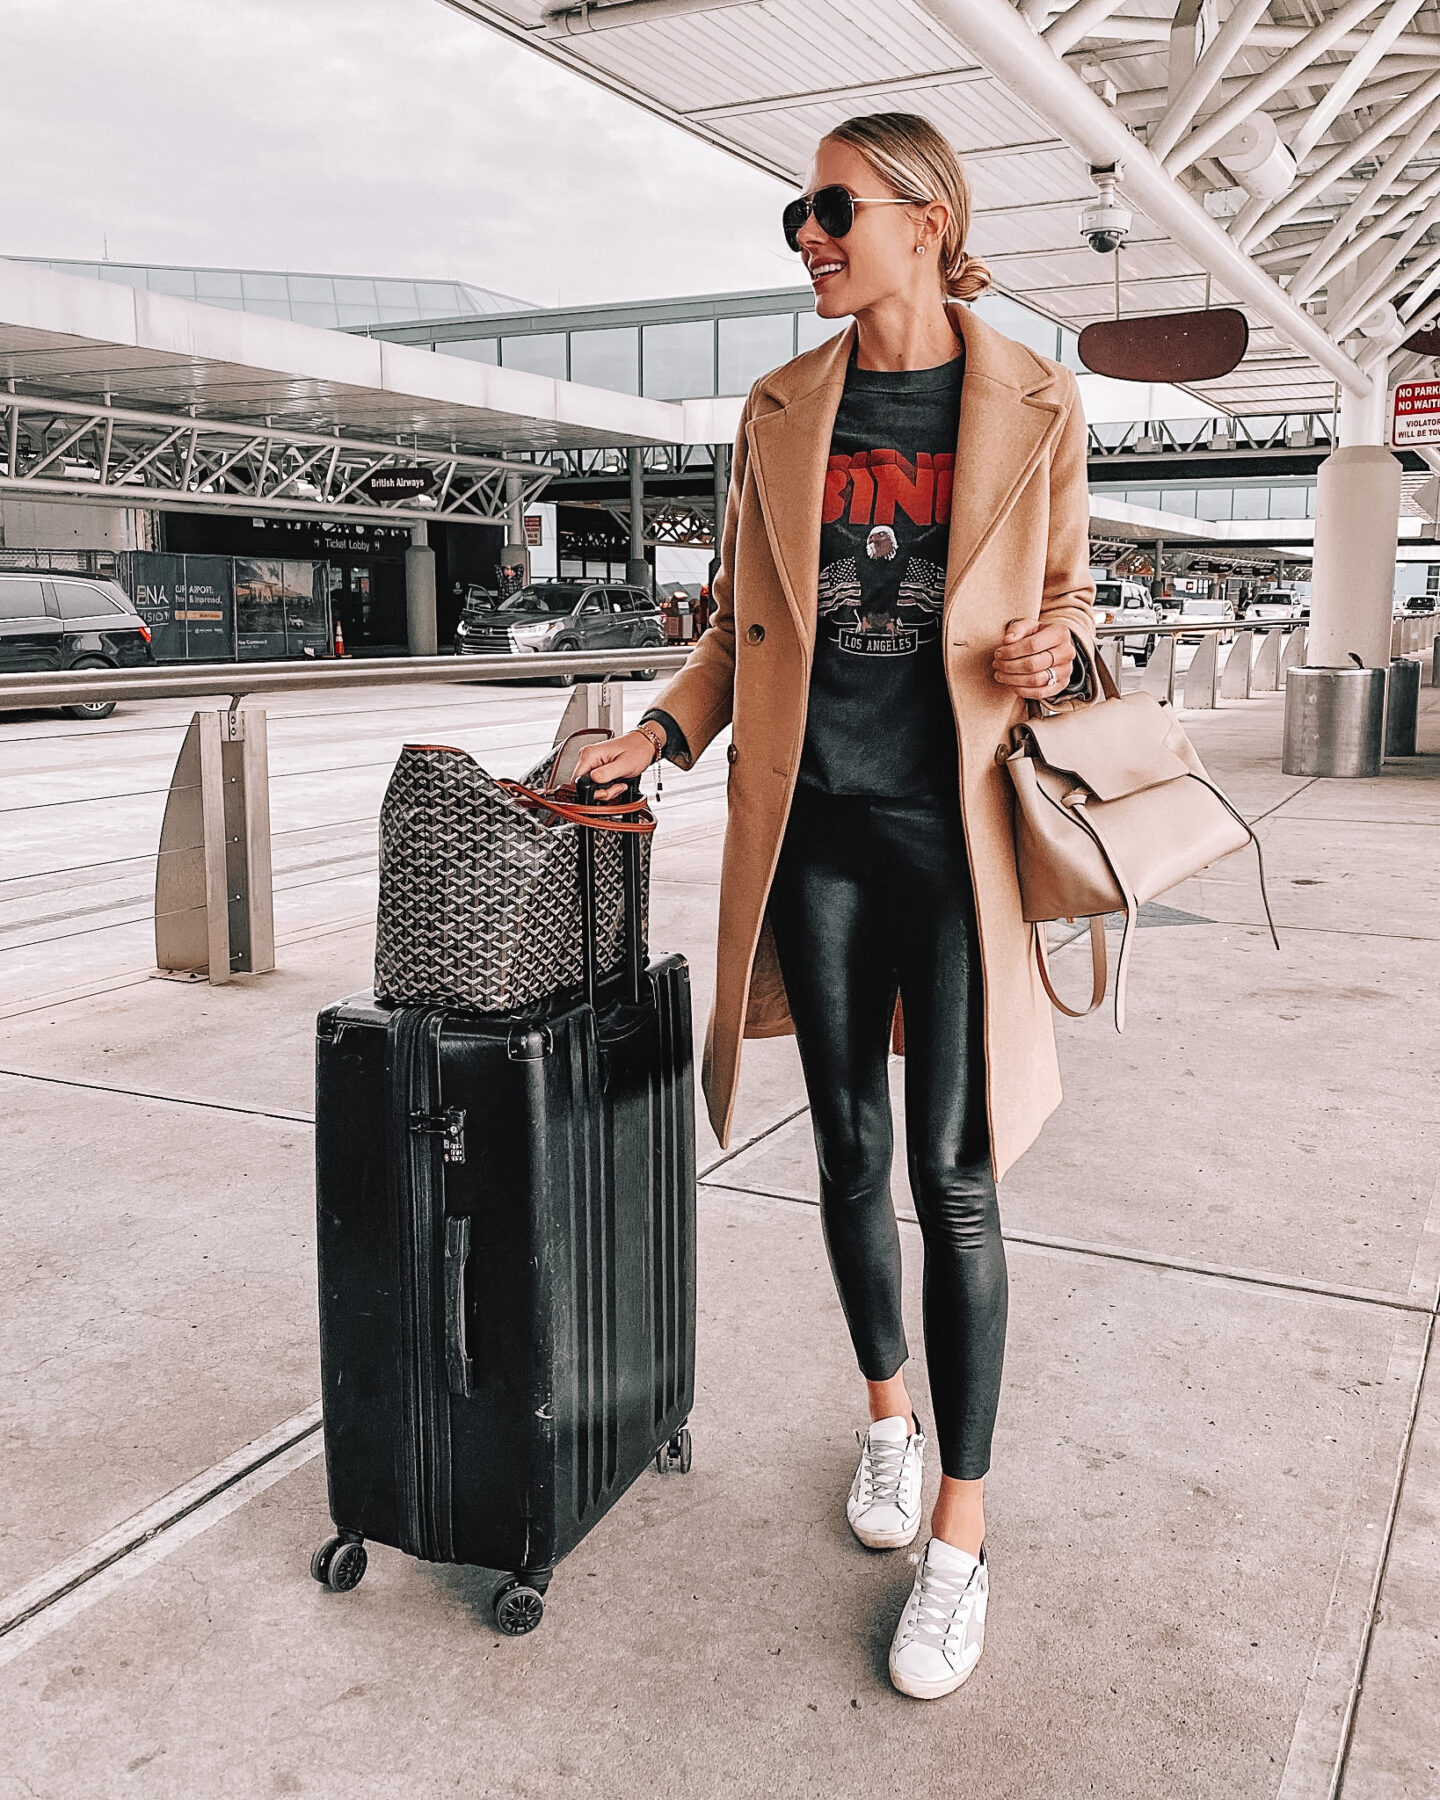 outfit ideas for airport travel